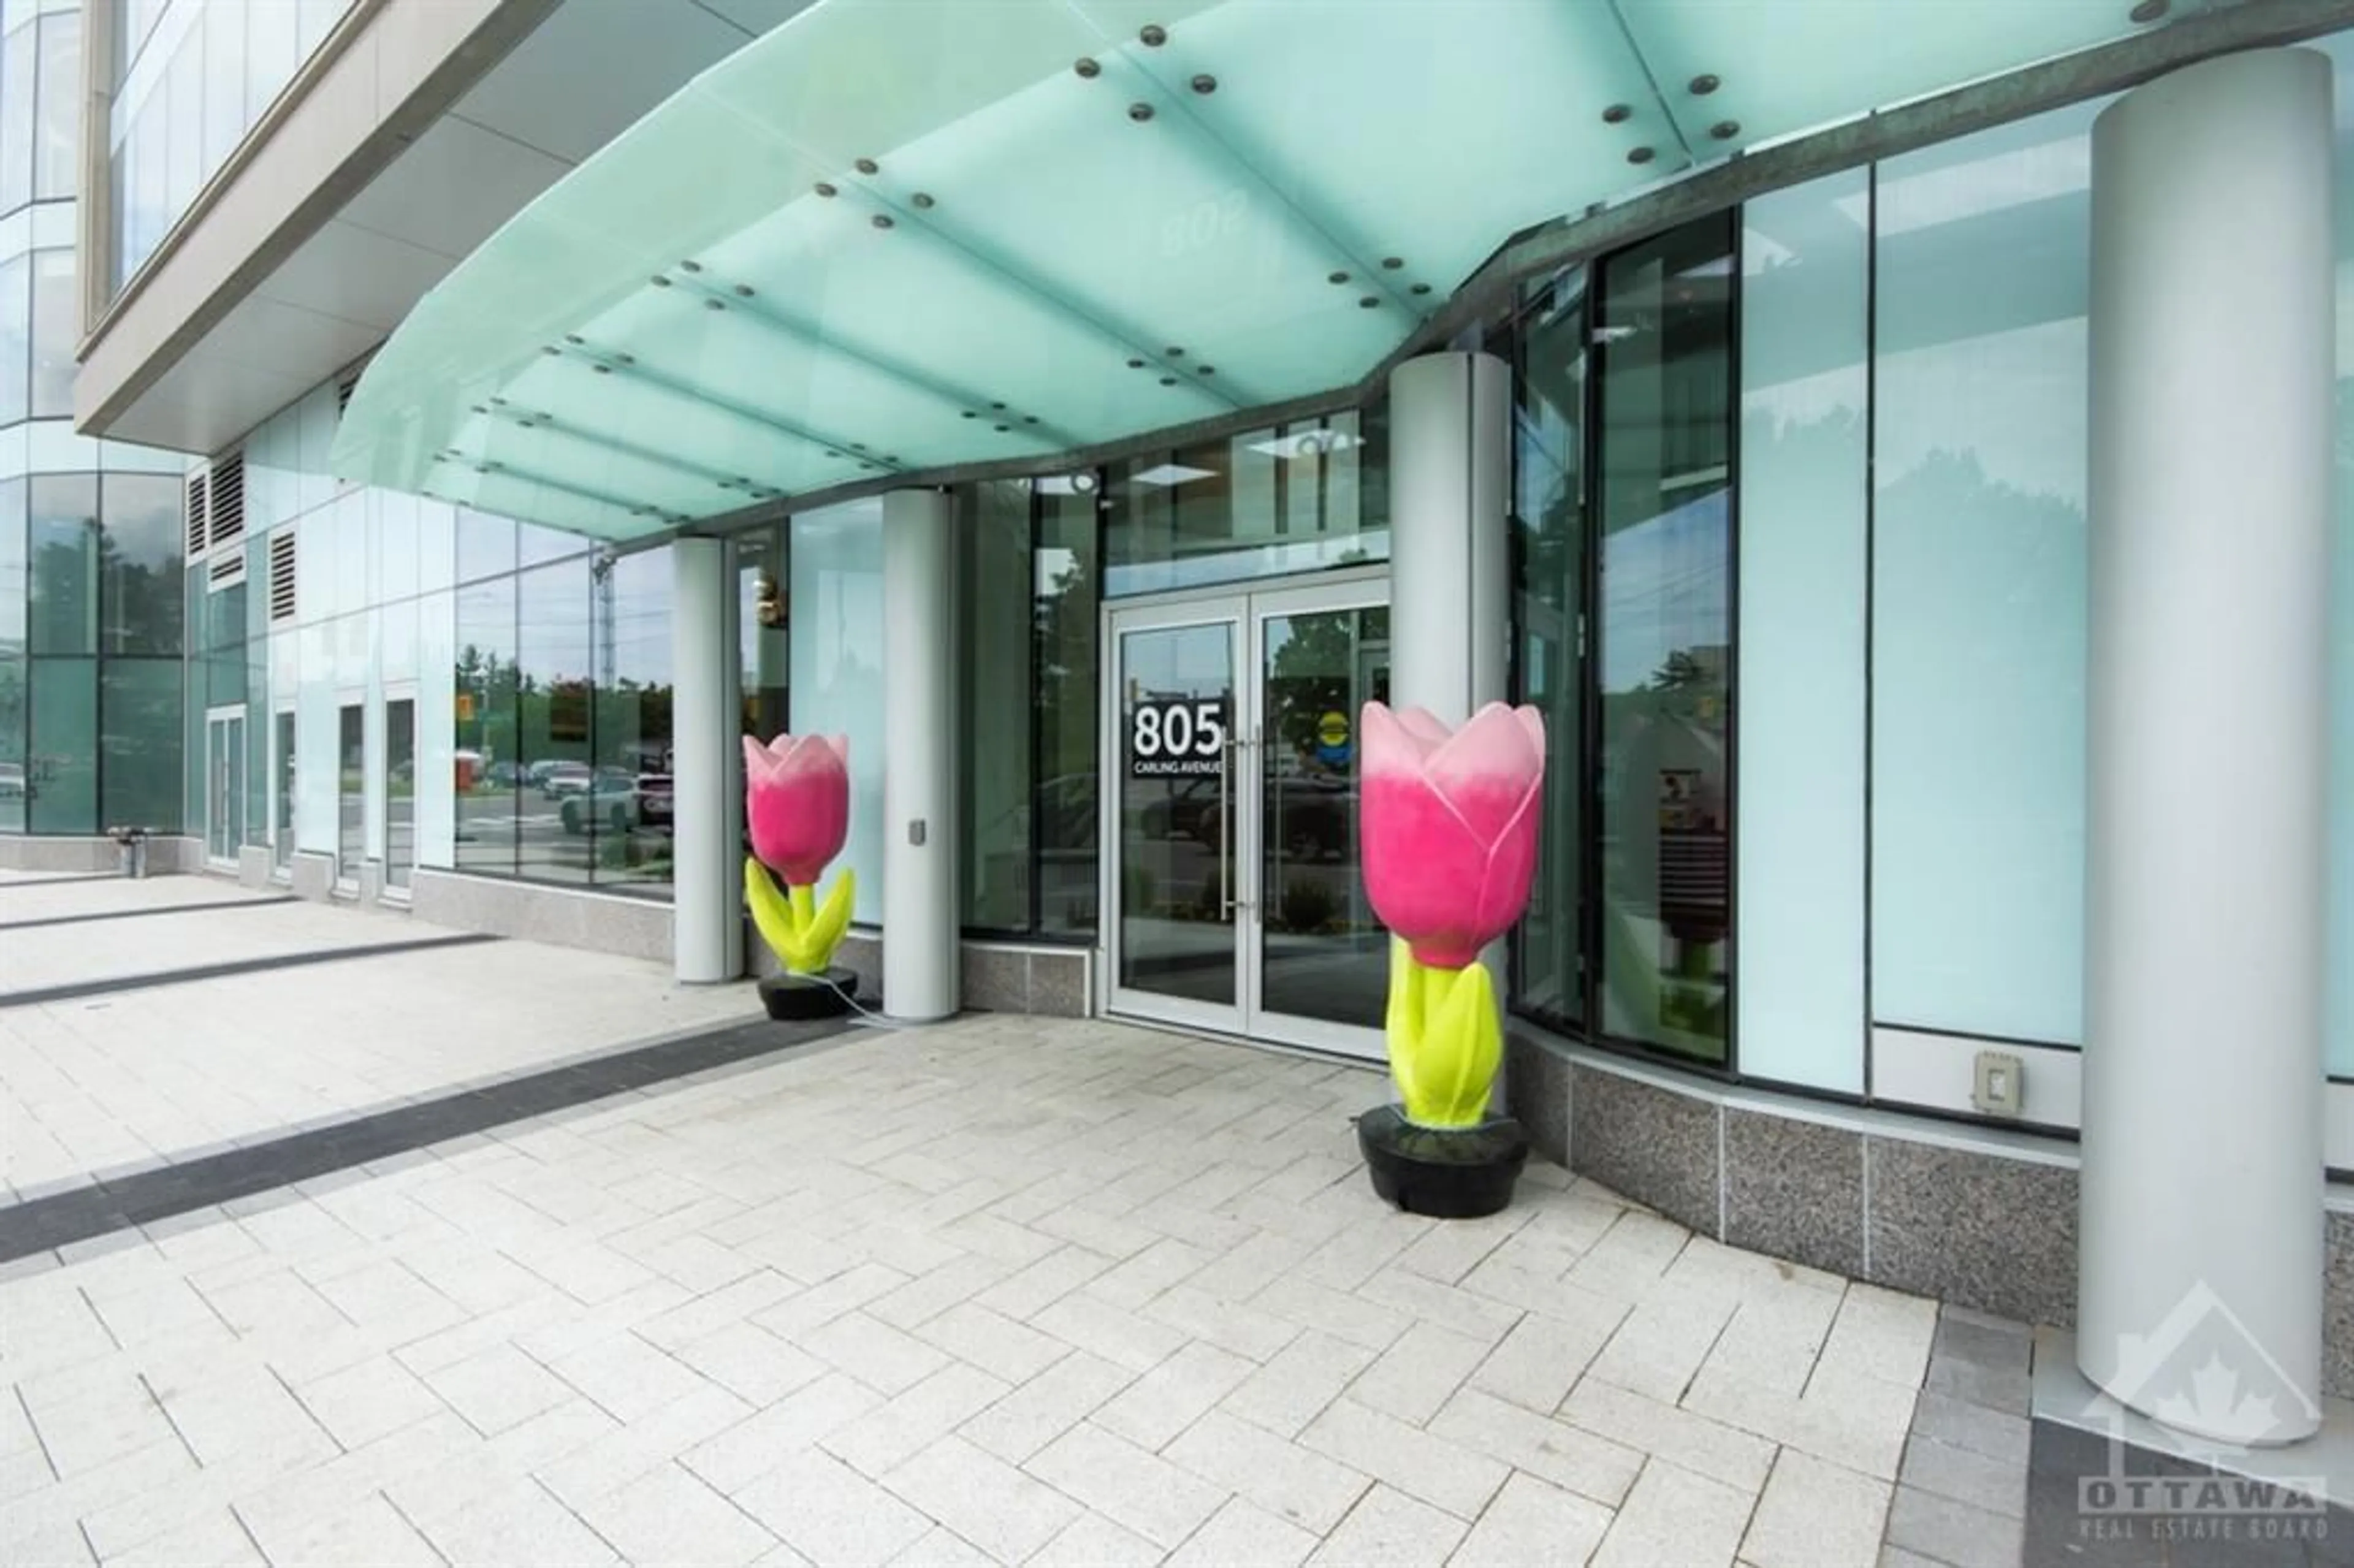 Indoor lobby for 805 CARLING Ave #509, Ottawa Ontario K1S 5W9